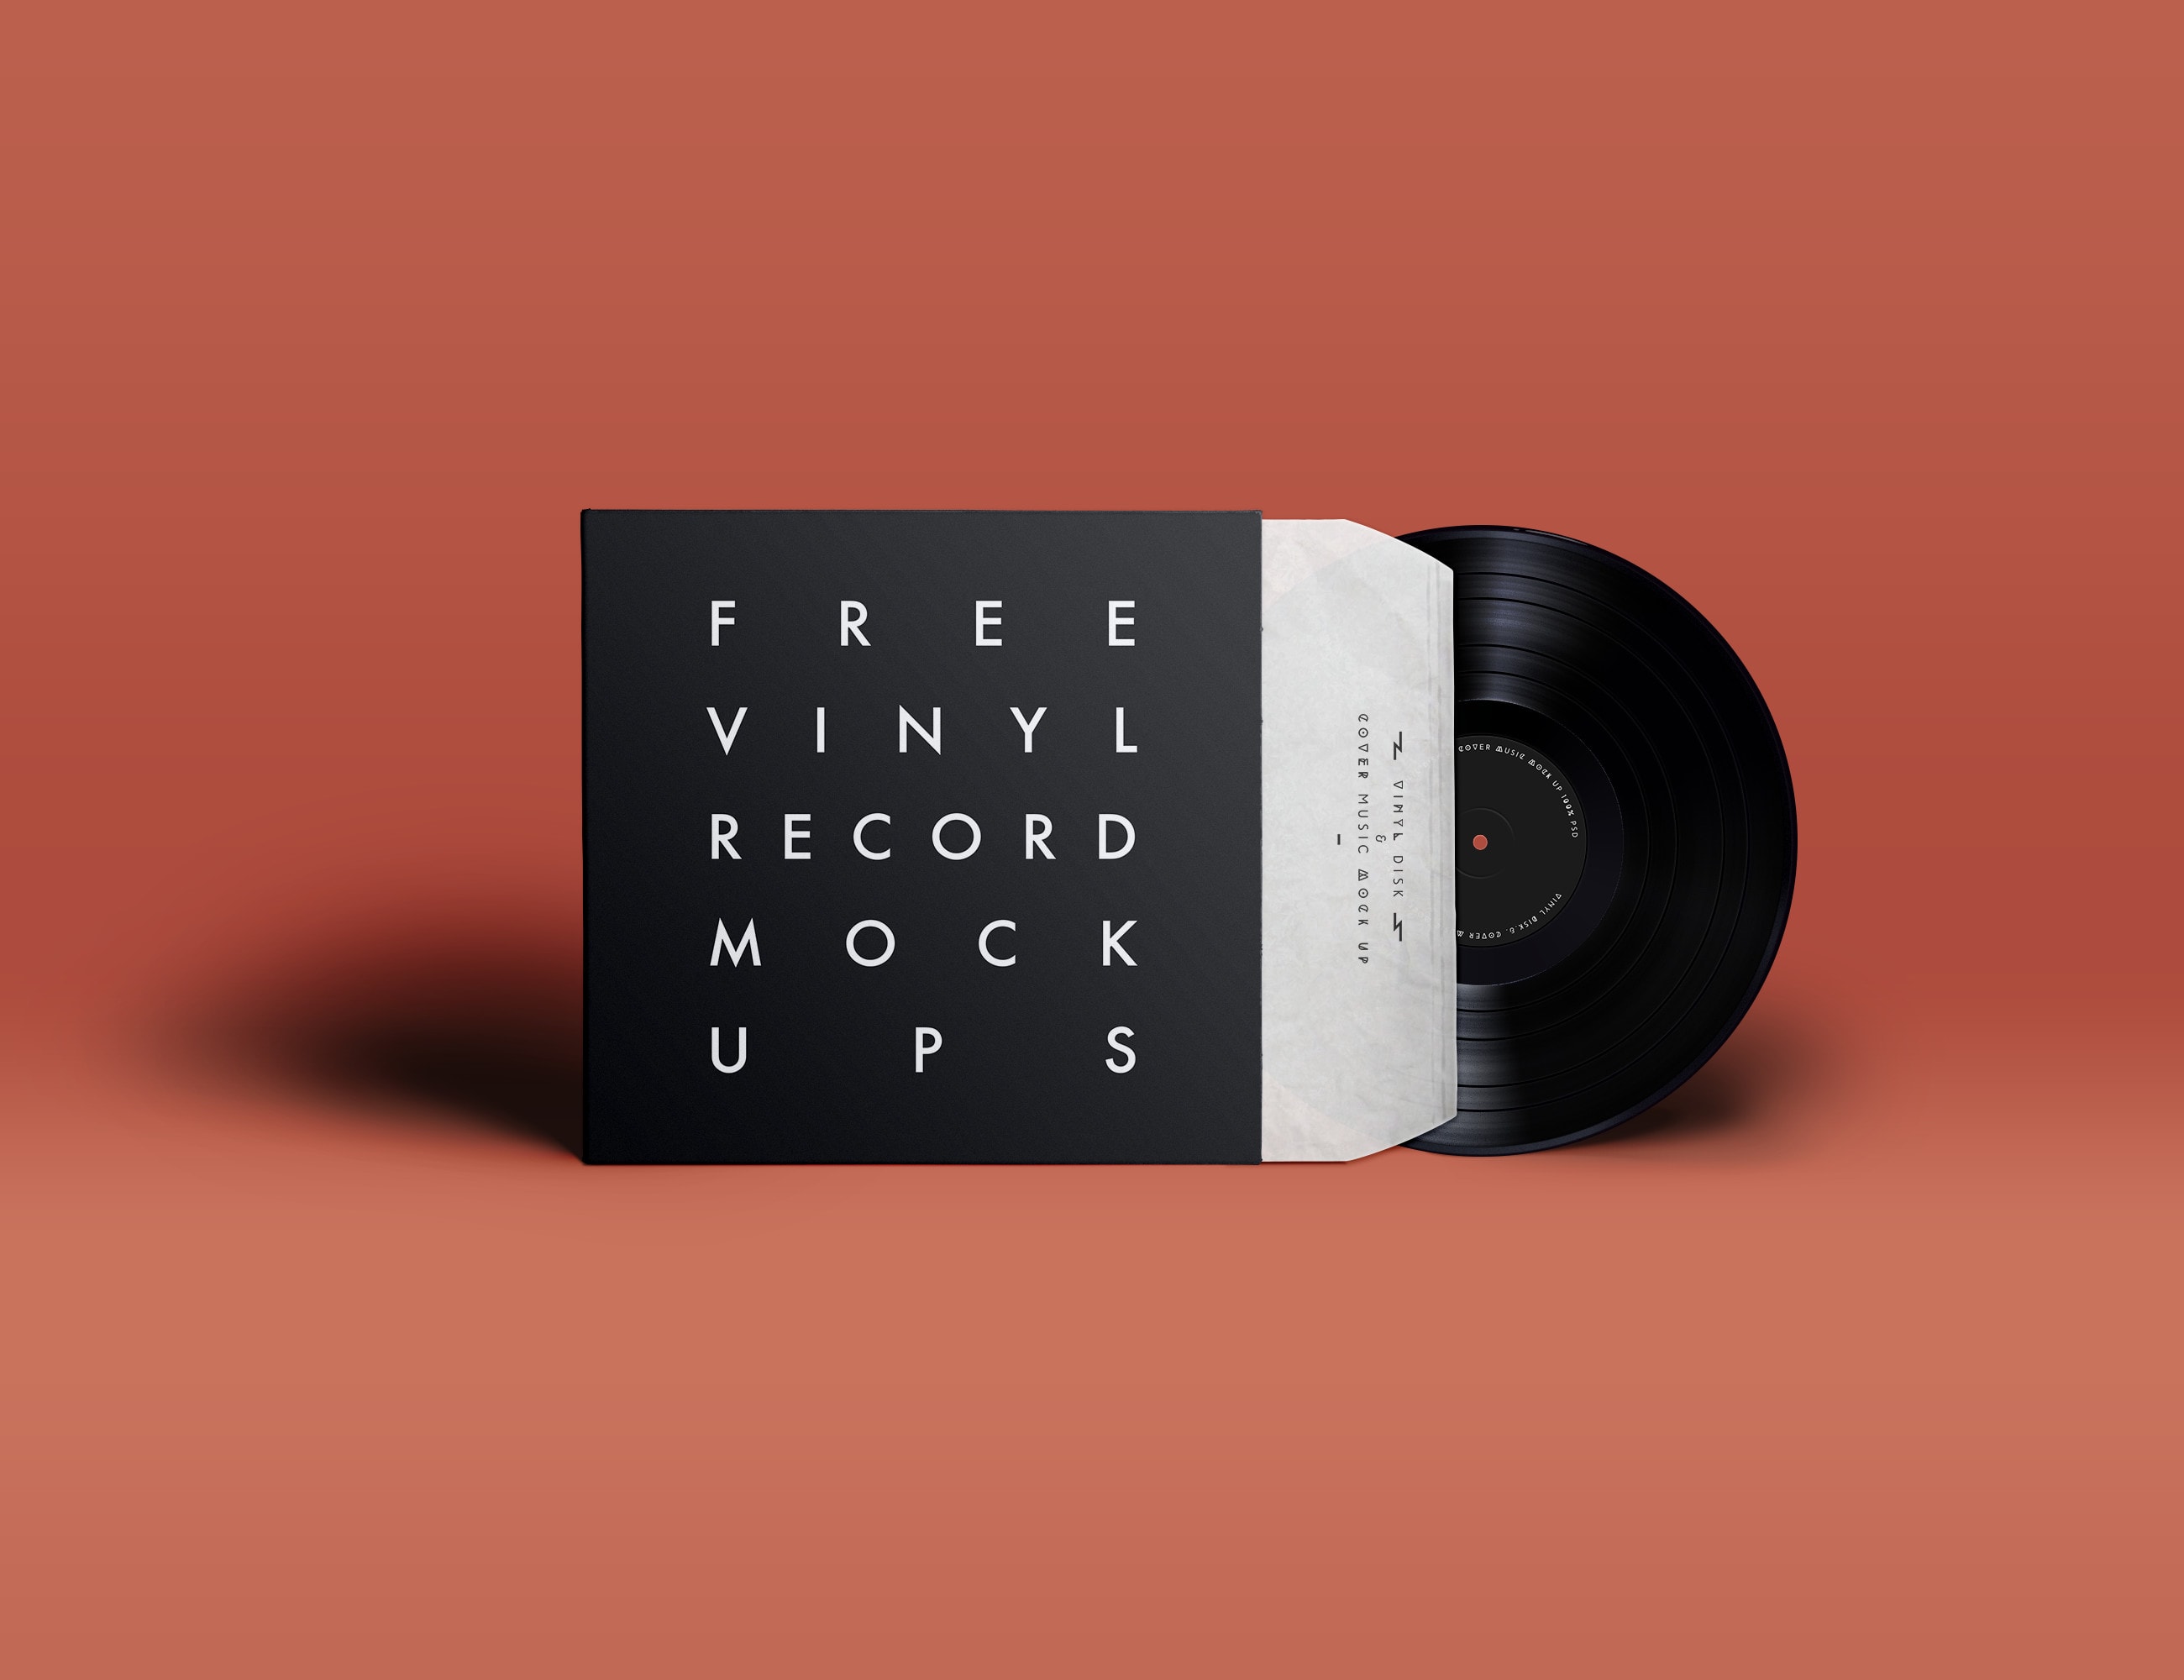 Download The 5+ Best FREE Vinyl Record PSD Mock-Ups | Hipsthetic